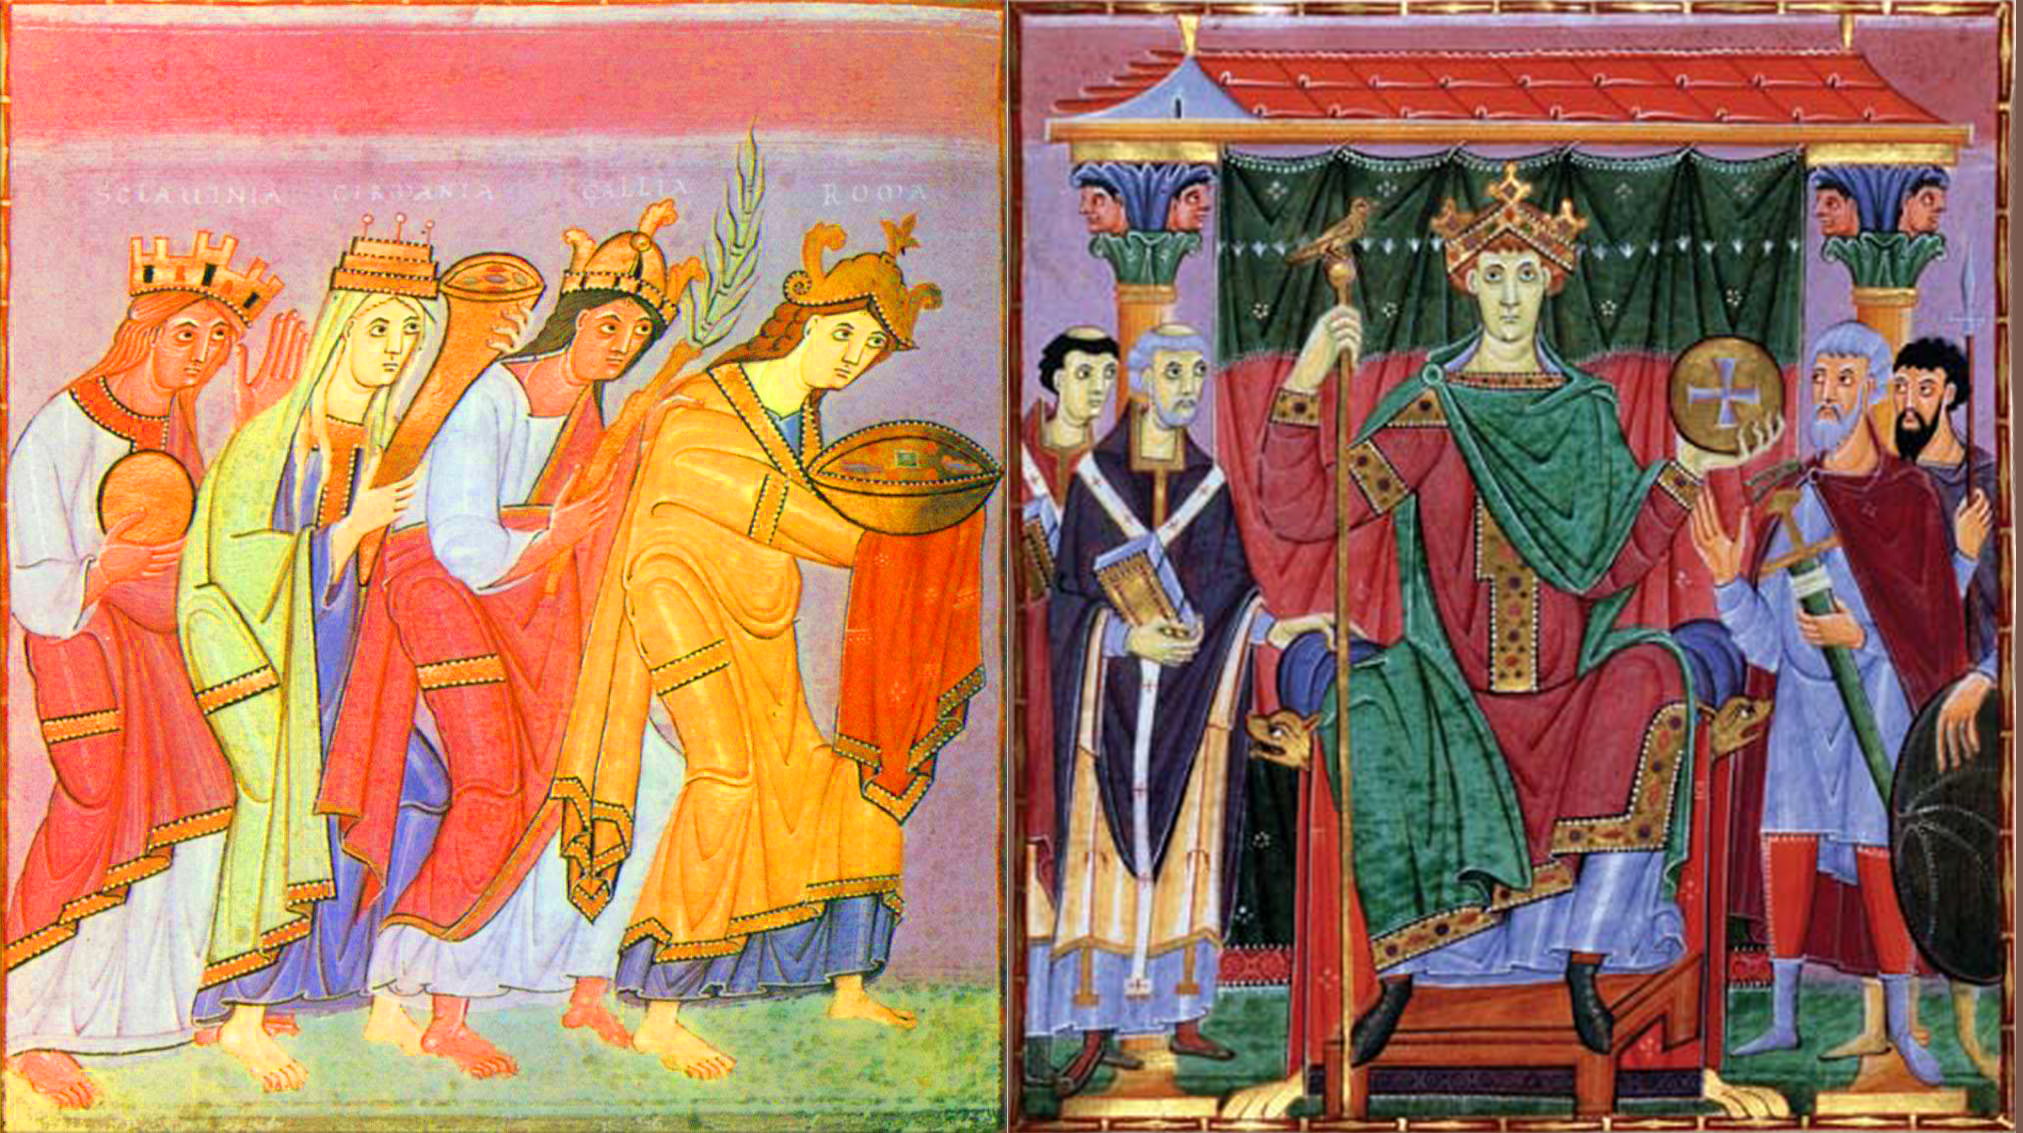 Sixteen-year-old Otto III is crowned Holy Roman Emperor on May 21st, 996